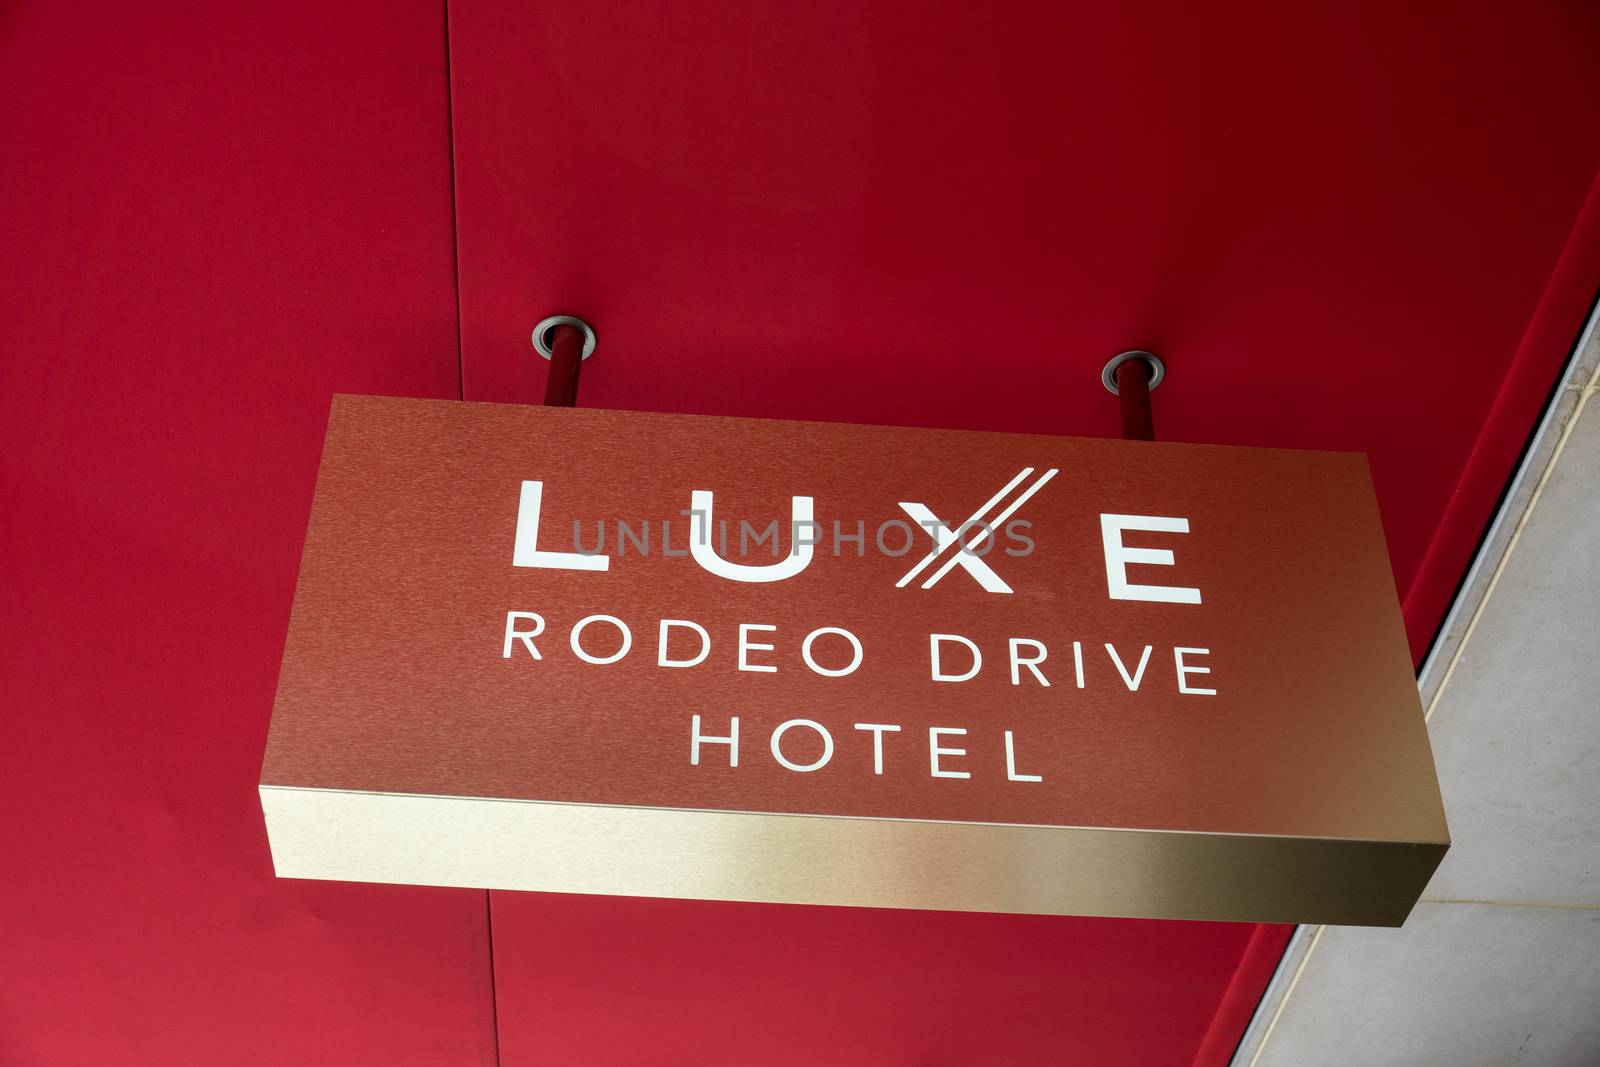 BEVERLY HILLS, CA/USA - MAY 10, 2015: Luxe Rodeo Drive Hotel. It is the only hotel located on Rodeo Drive, the main shopping street in Beverly Hills.